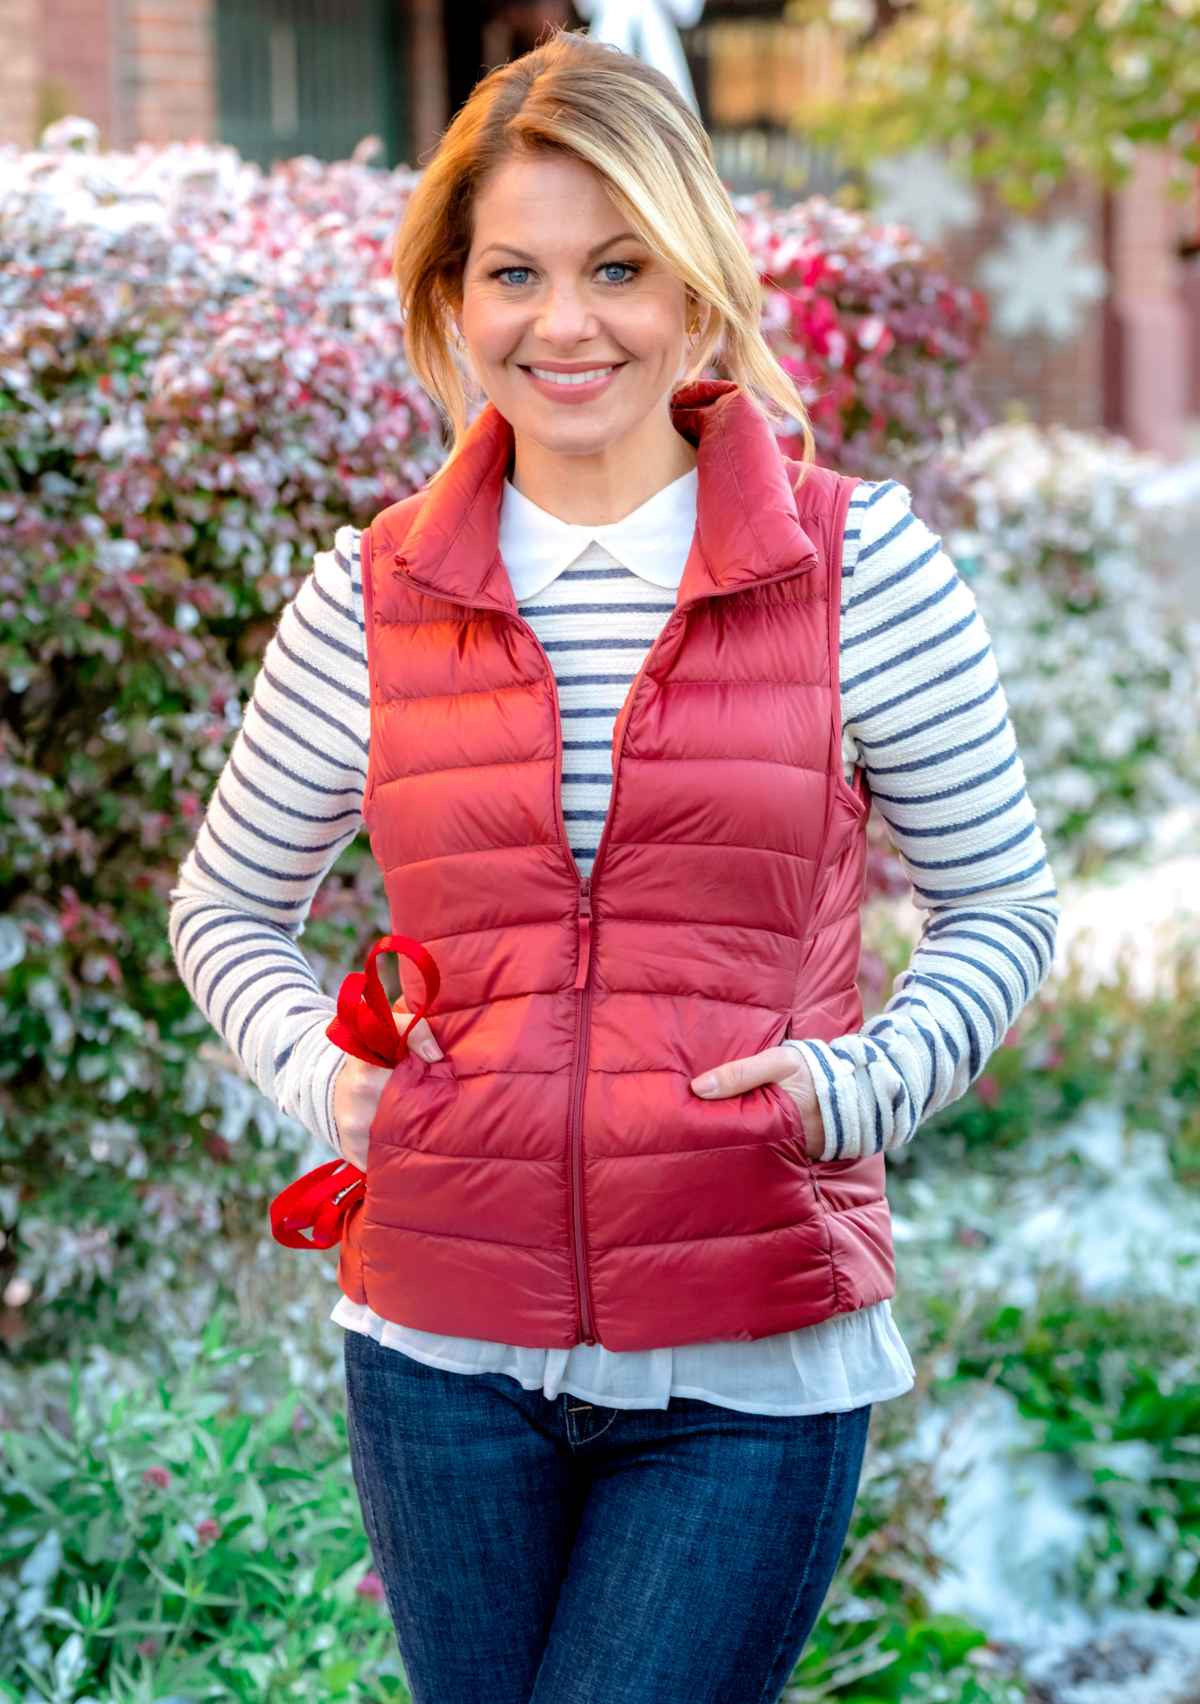 25 Things You Didn't Know About Candace Cameron Bure